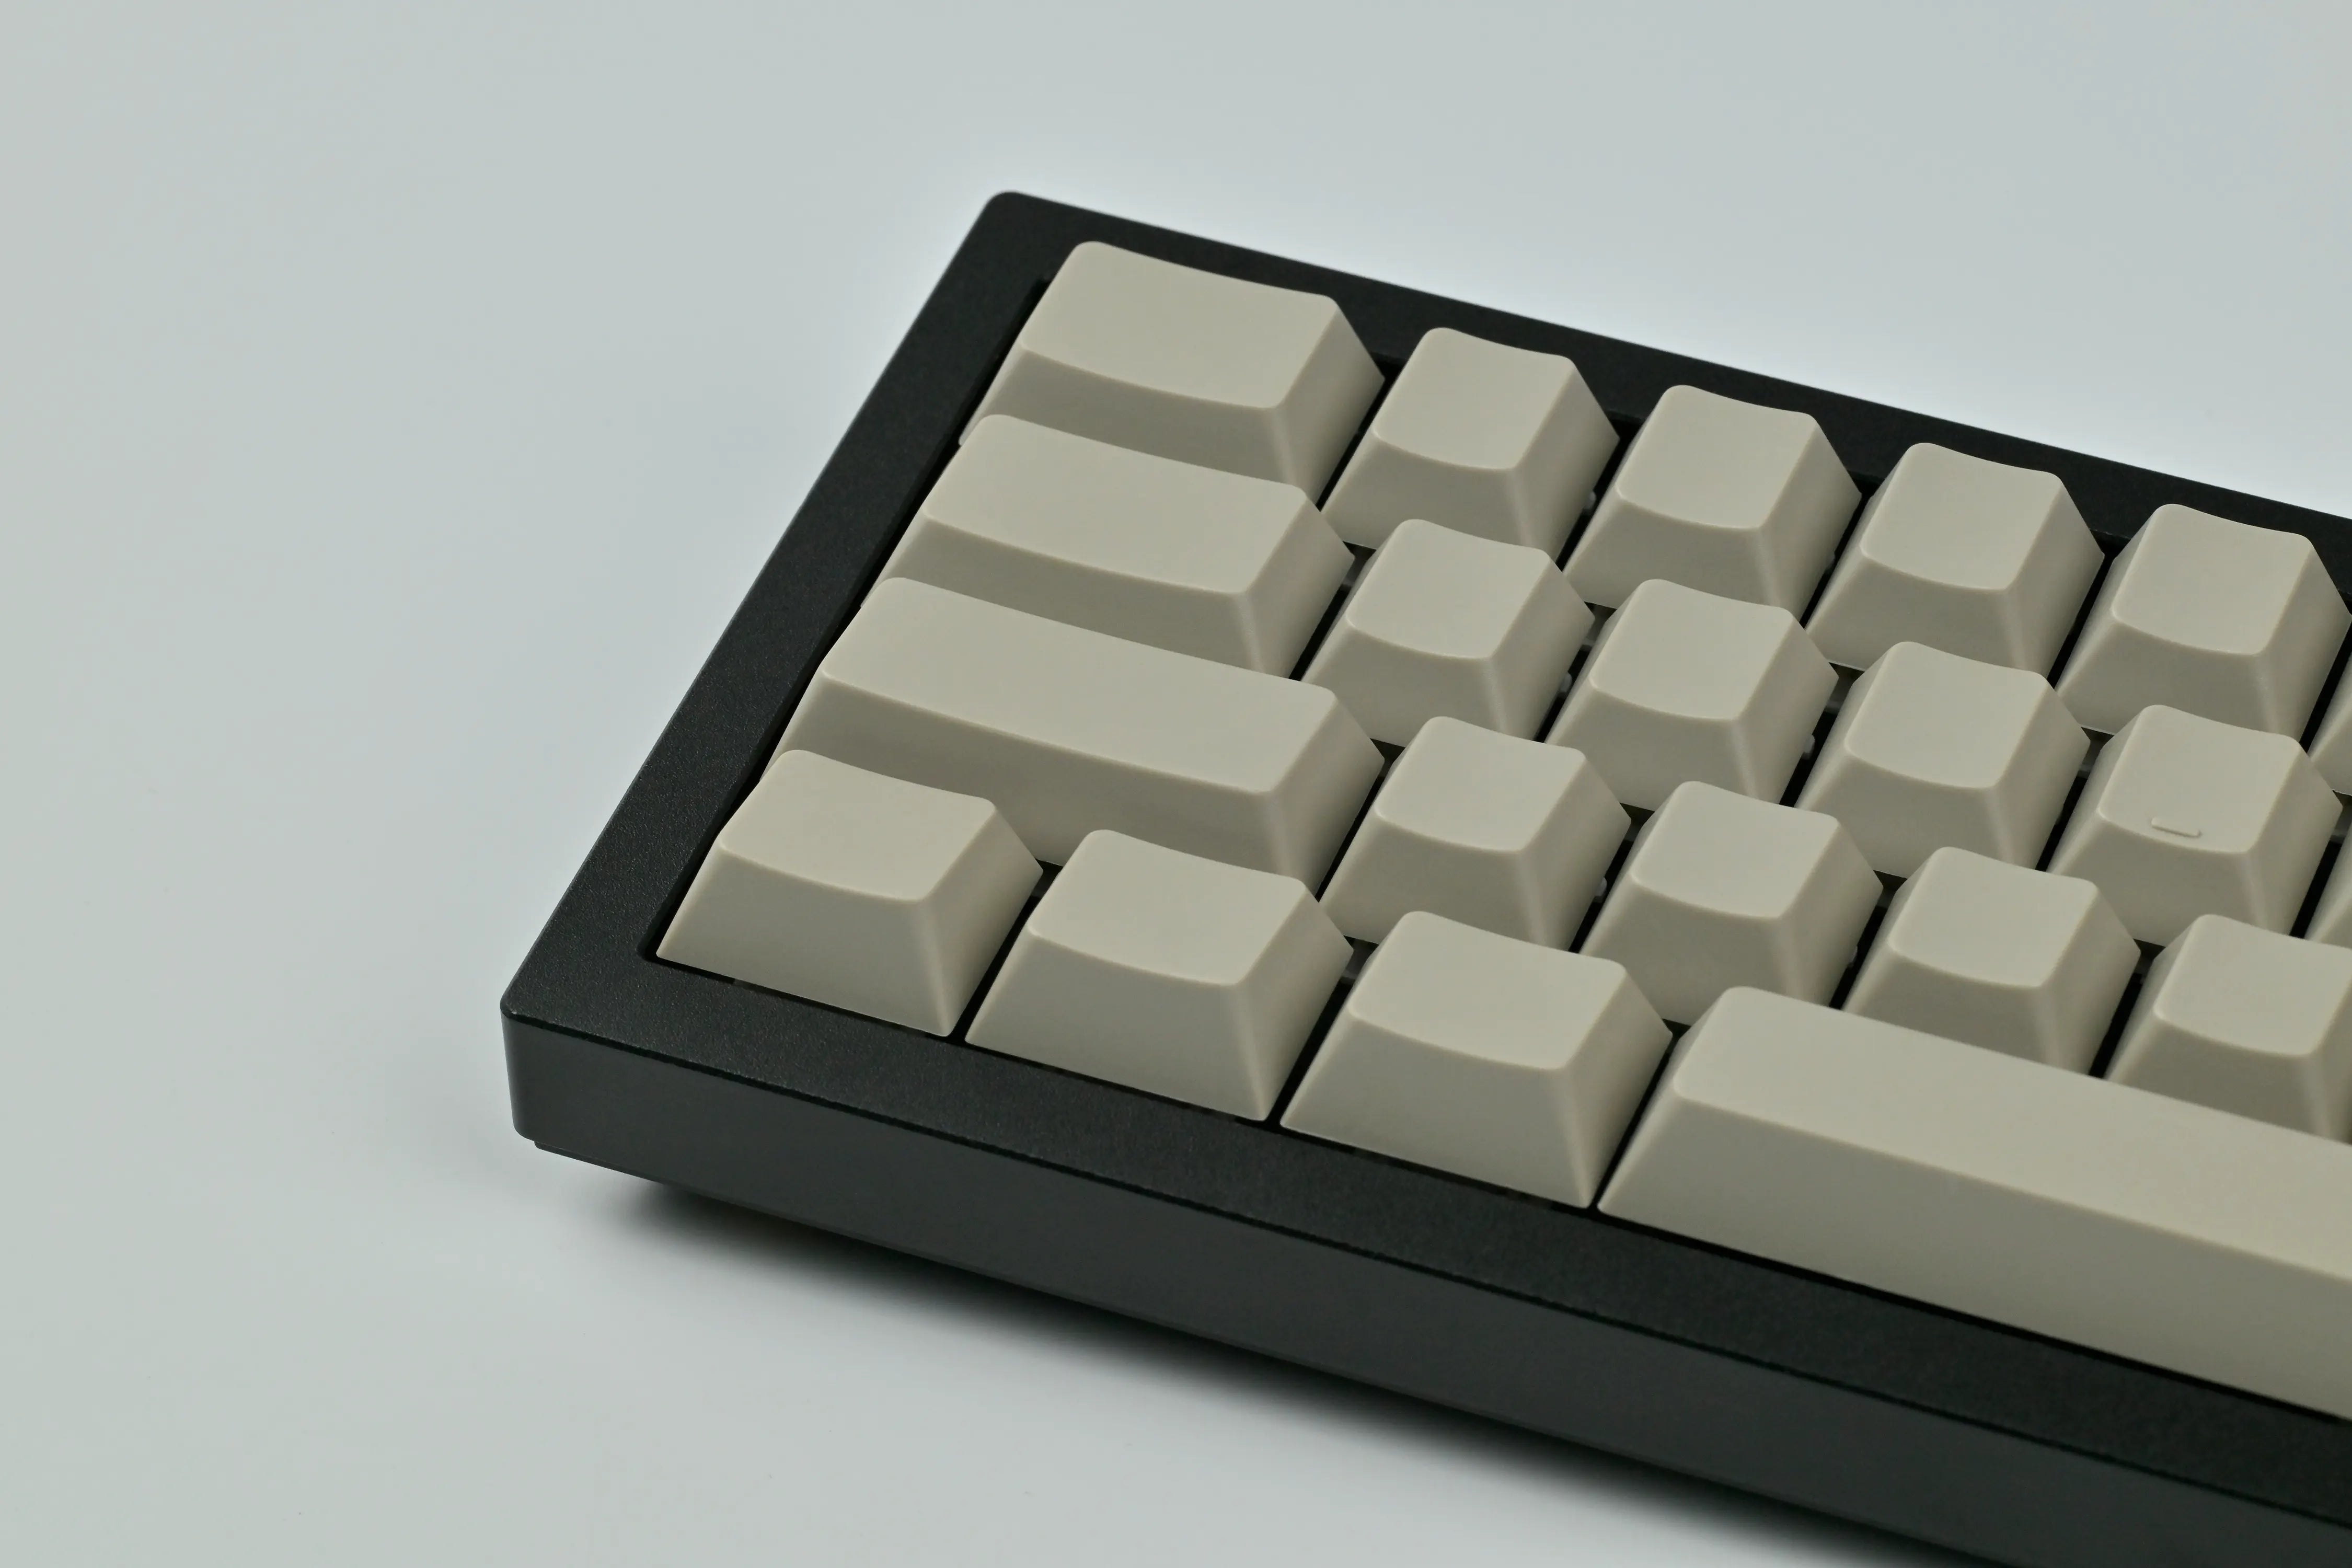 Keyreative ABS Cherry Profile Classic Grey Blank Keycaps